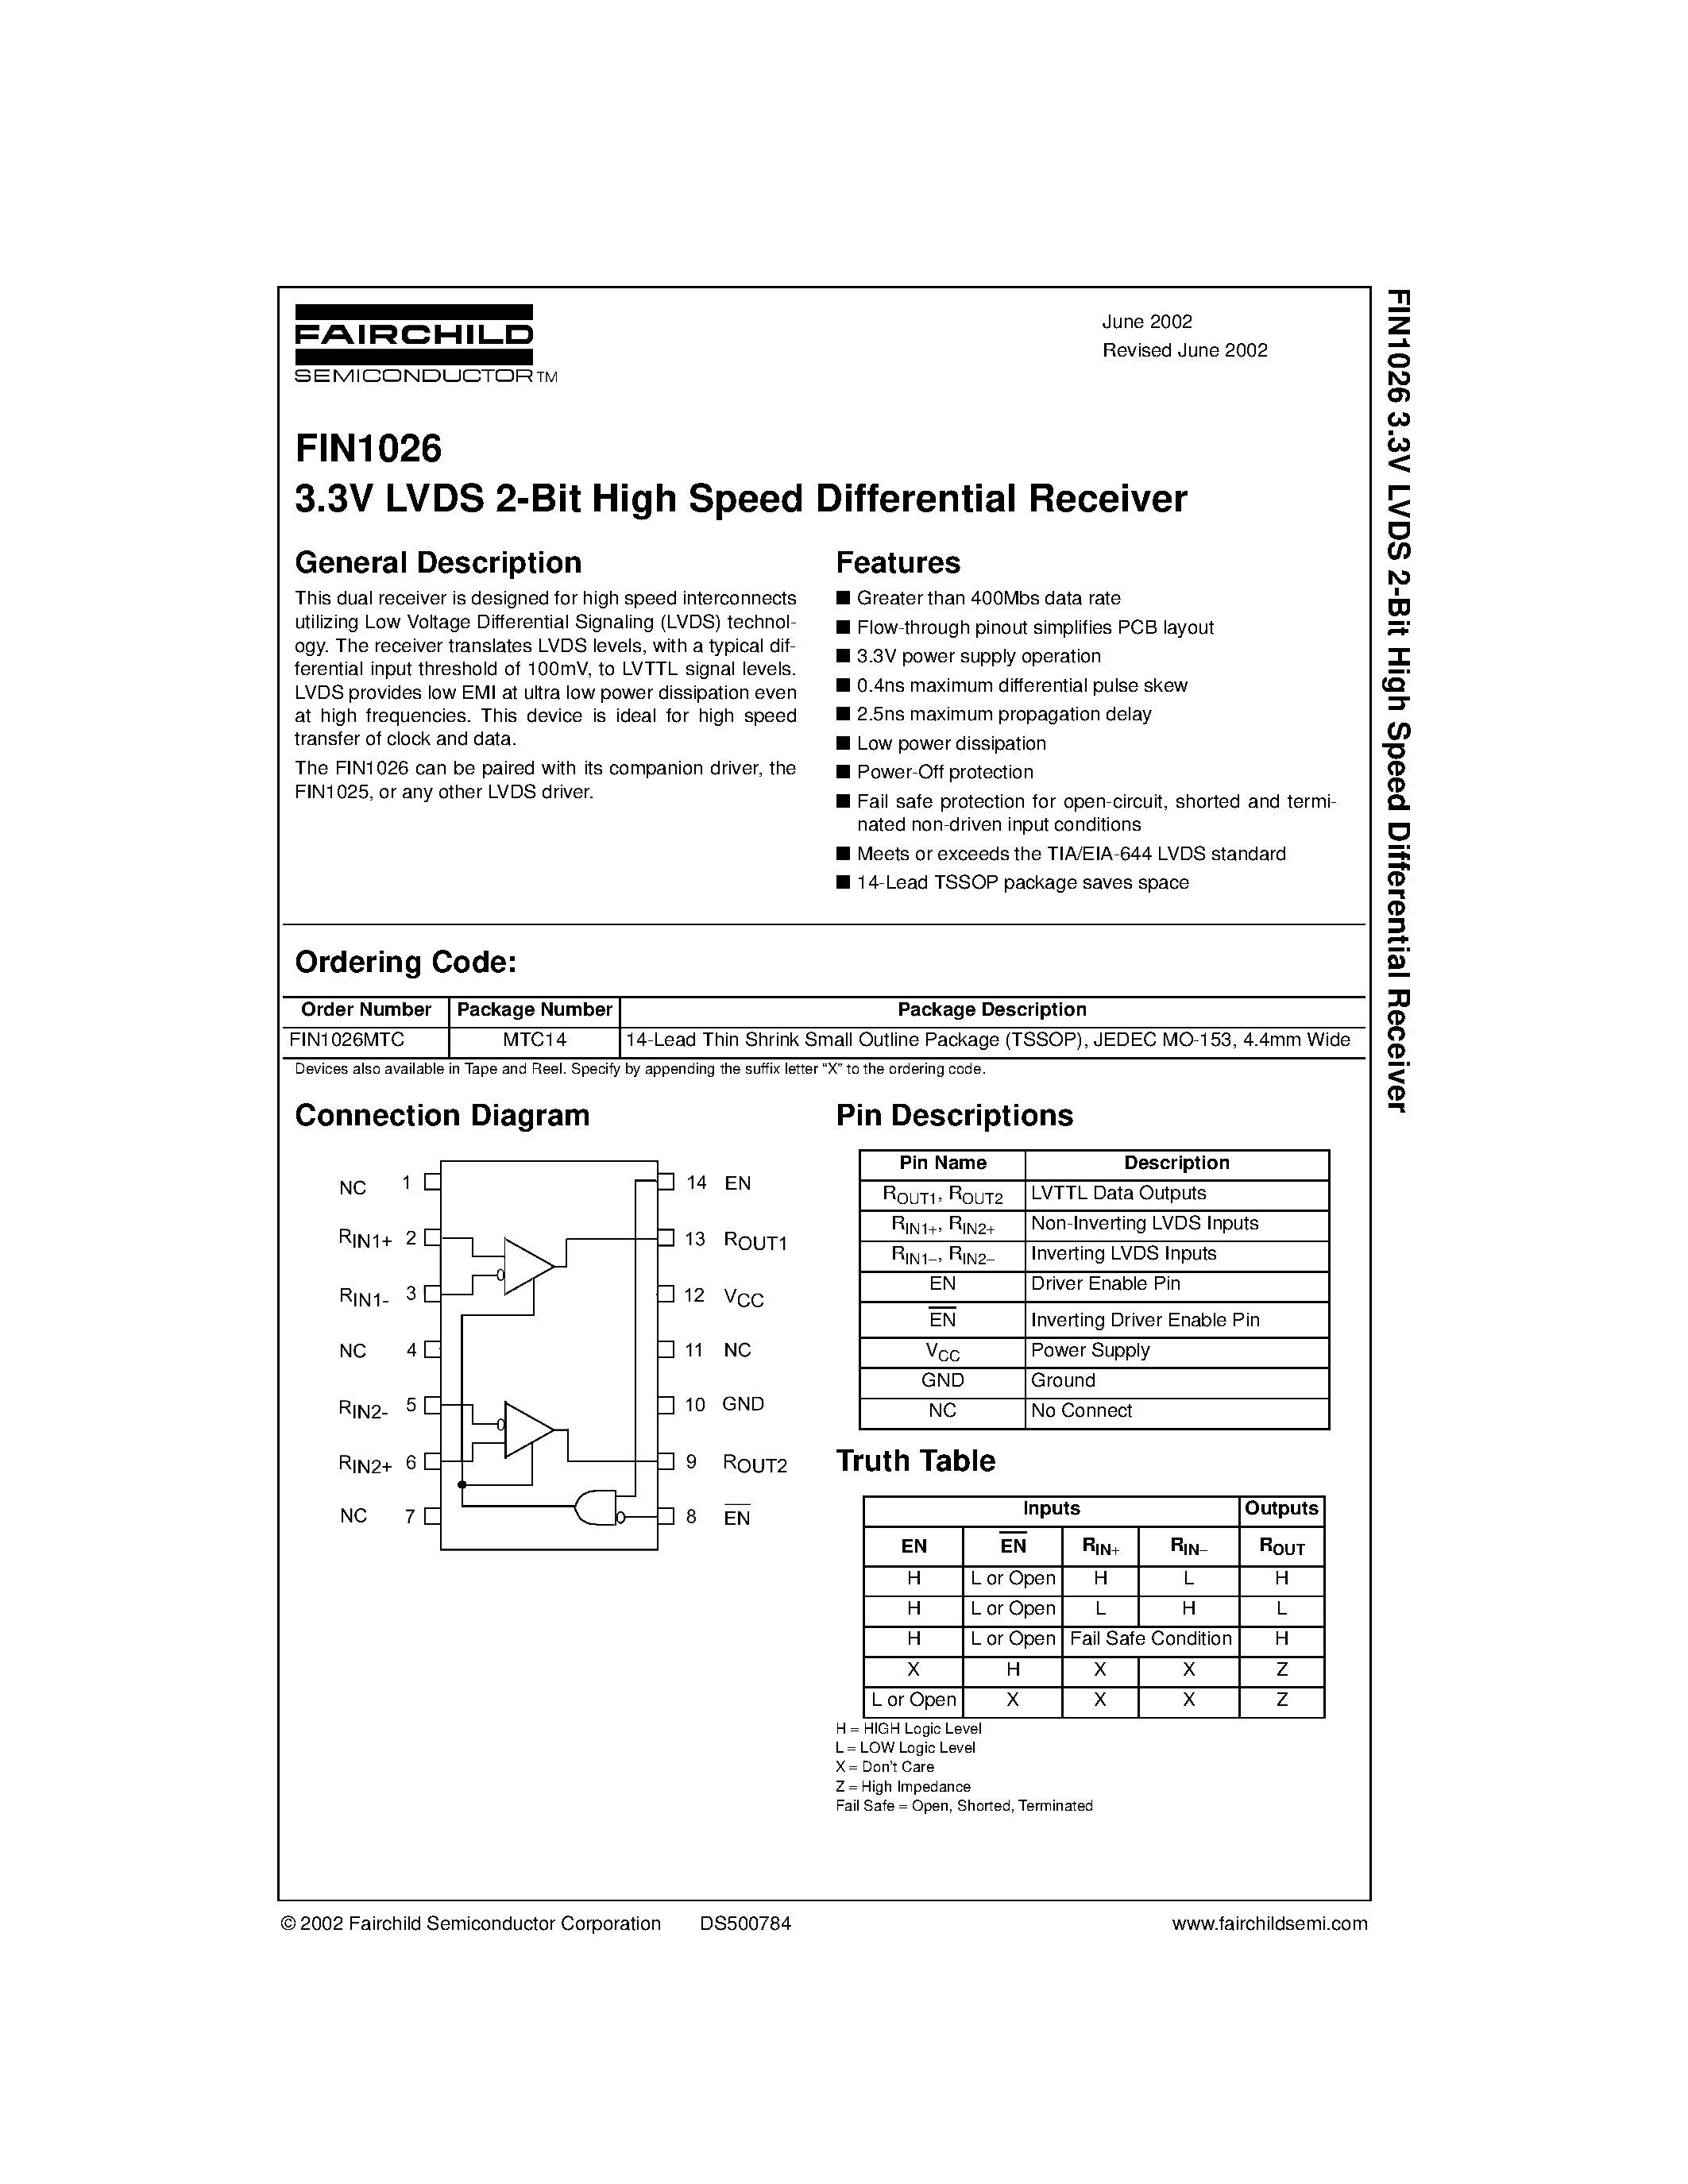 Datasheet FIN1026 - 3.3V LVDS 2-Bit High Speed Differential Receiver page 1